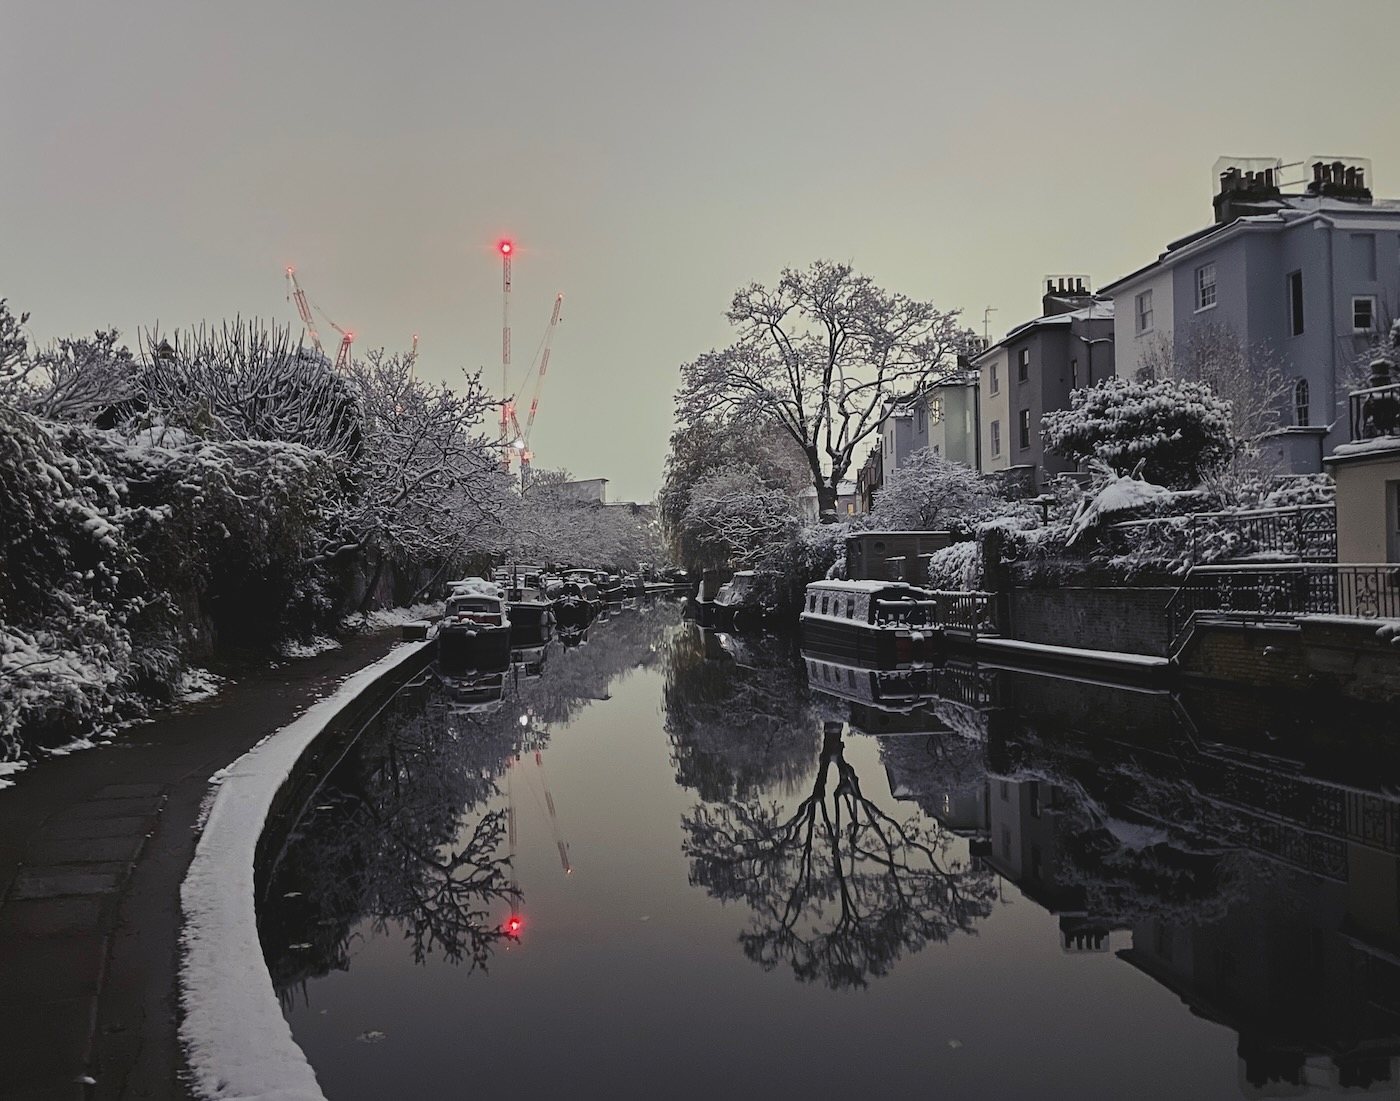 Regents Canal in the early morning with snow covering every surface